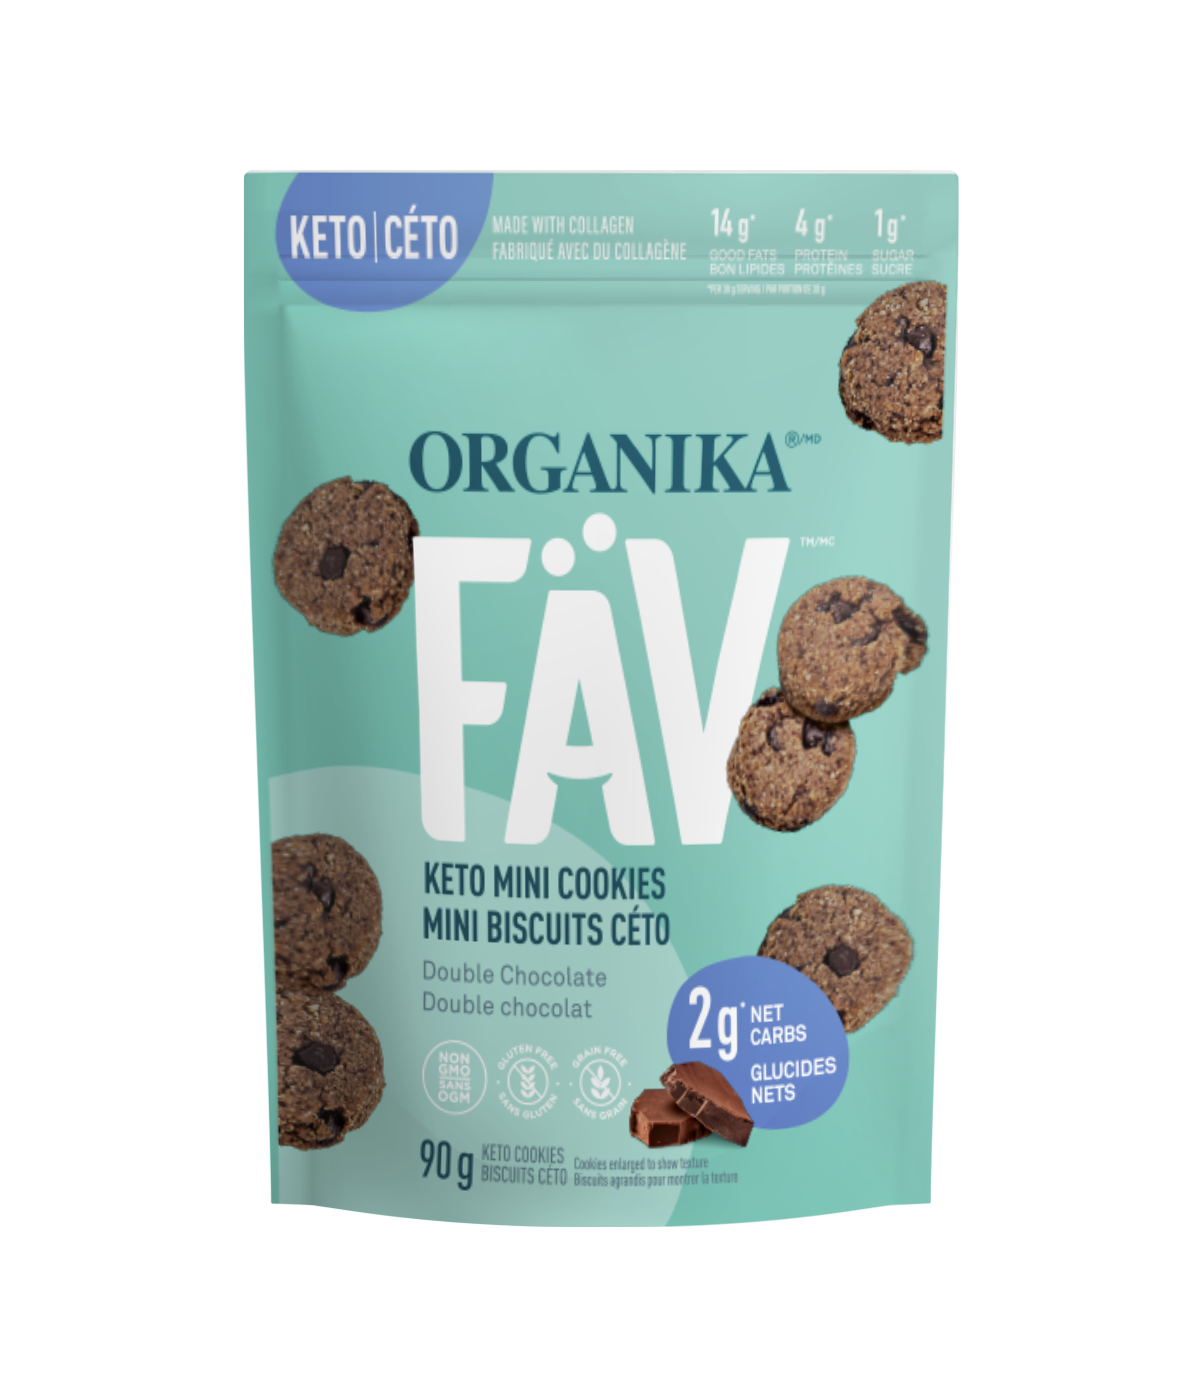 FÄV KETO MINI COOKIES DOUBLE CHOCOLATE / 90g X 6 POUCHES